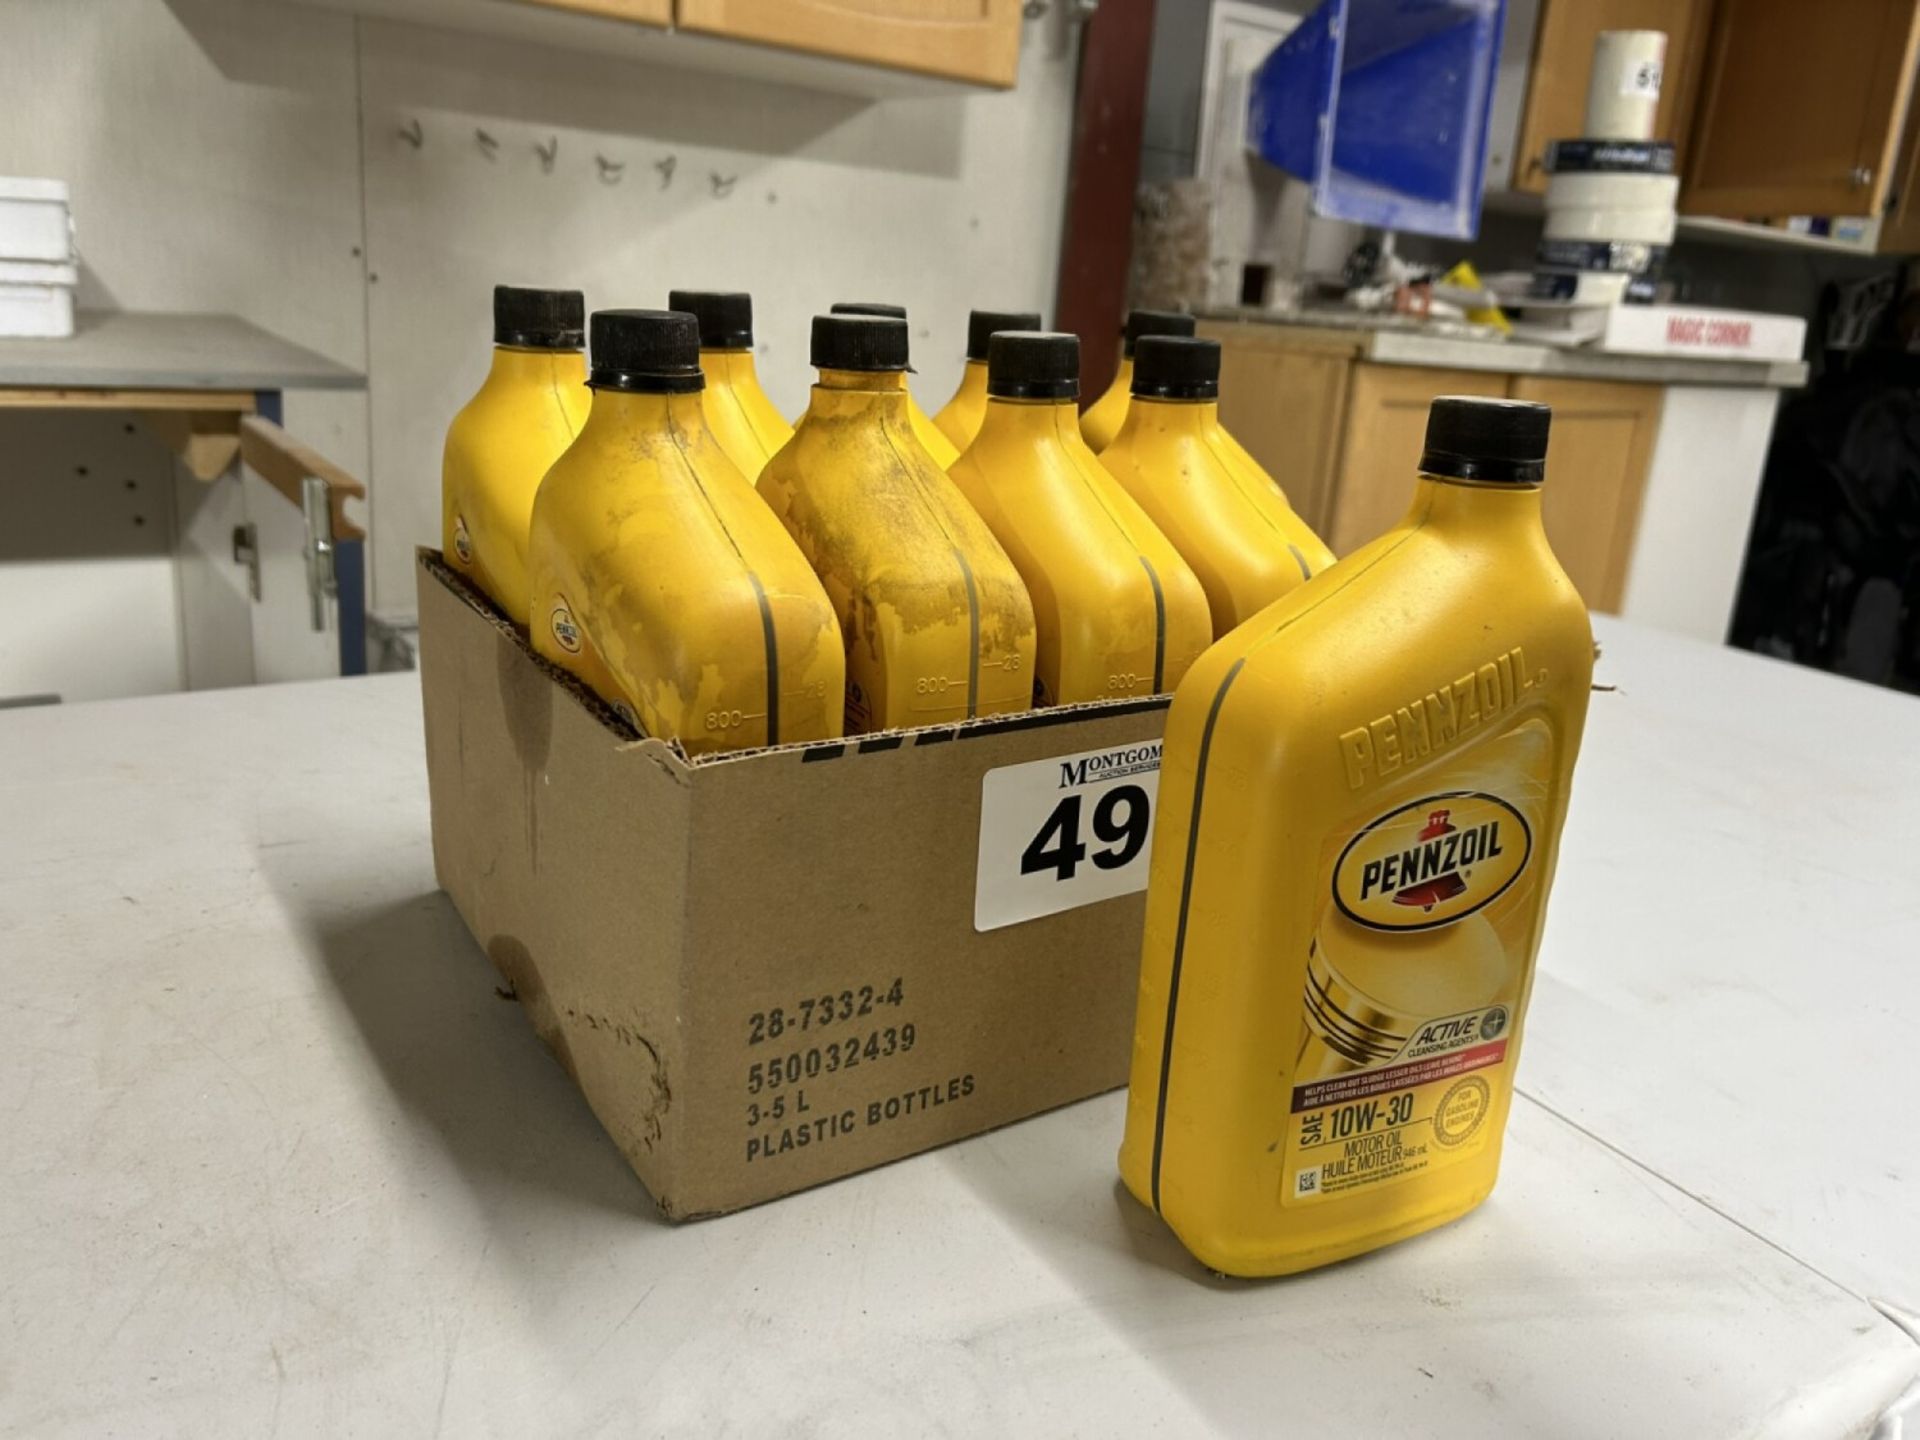 10L OF PENNZOIL SAE 10W-30 ENGINE OIL